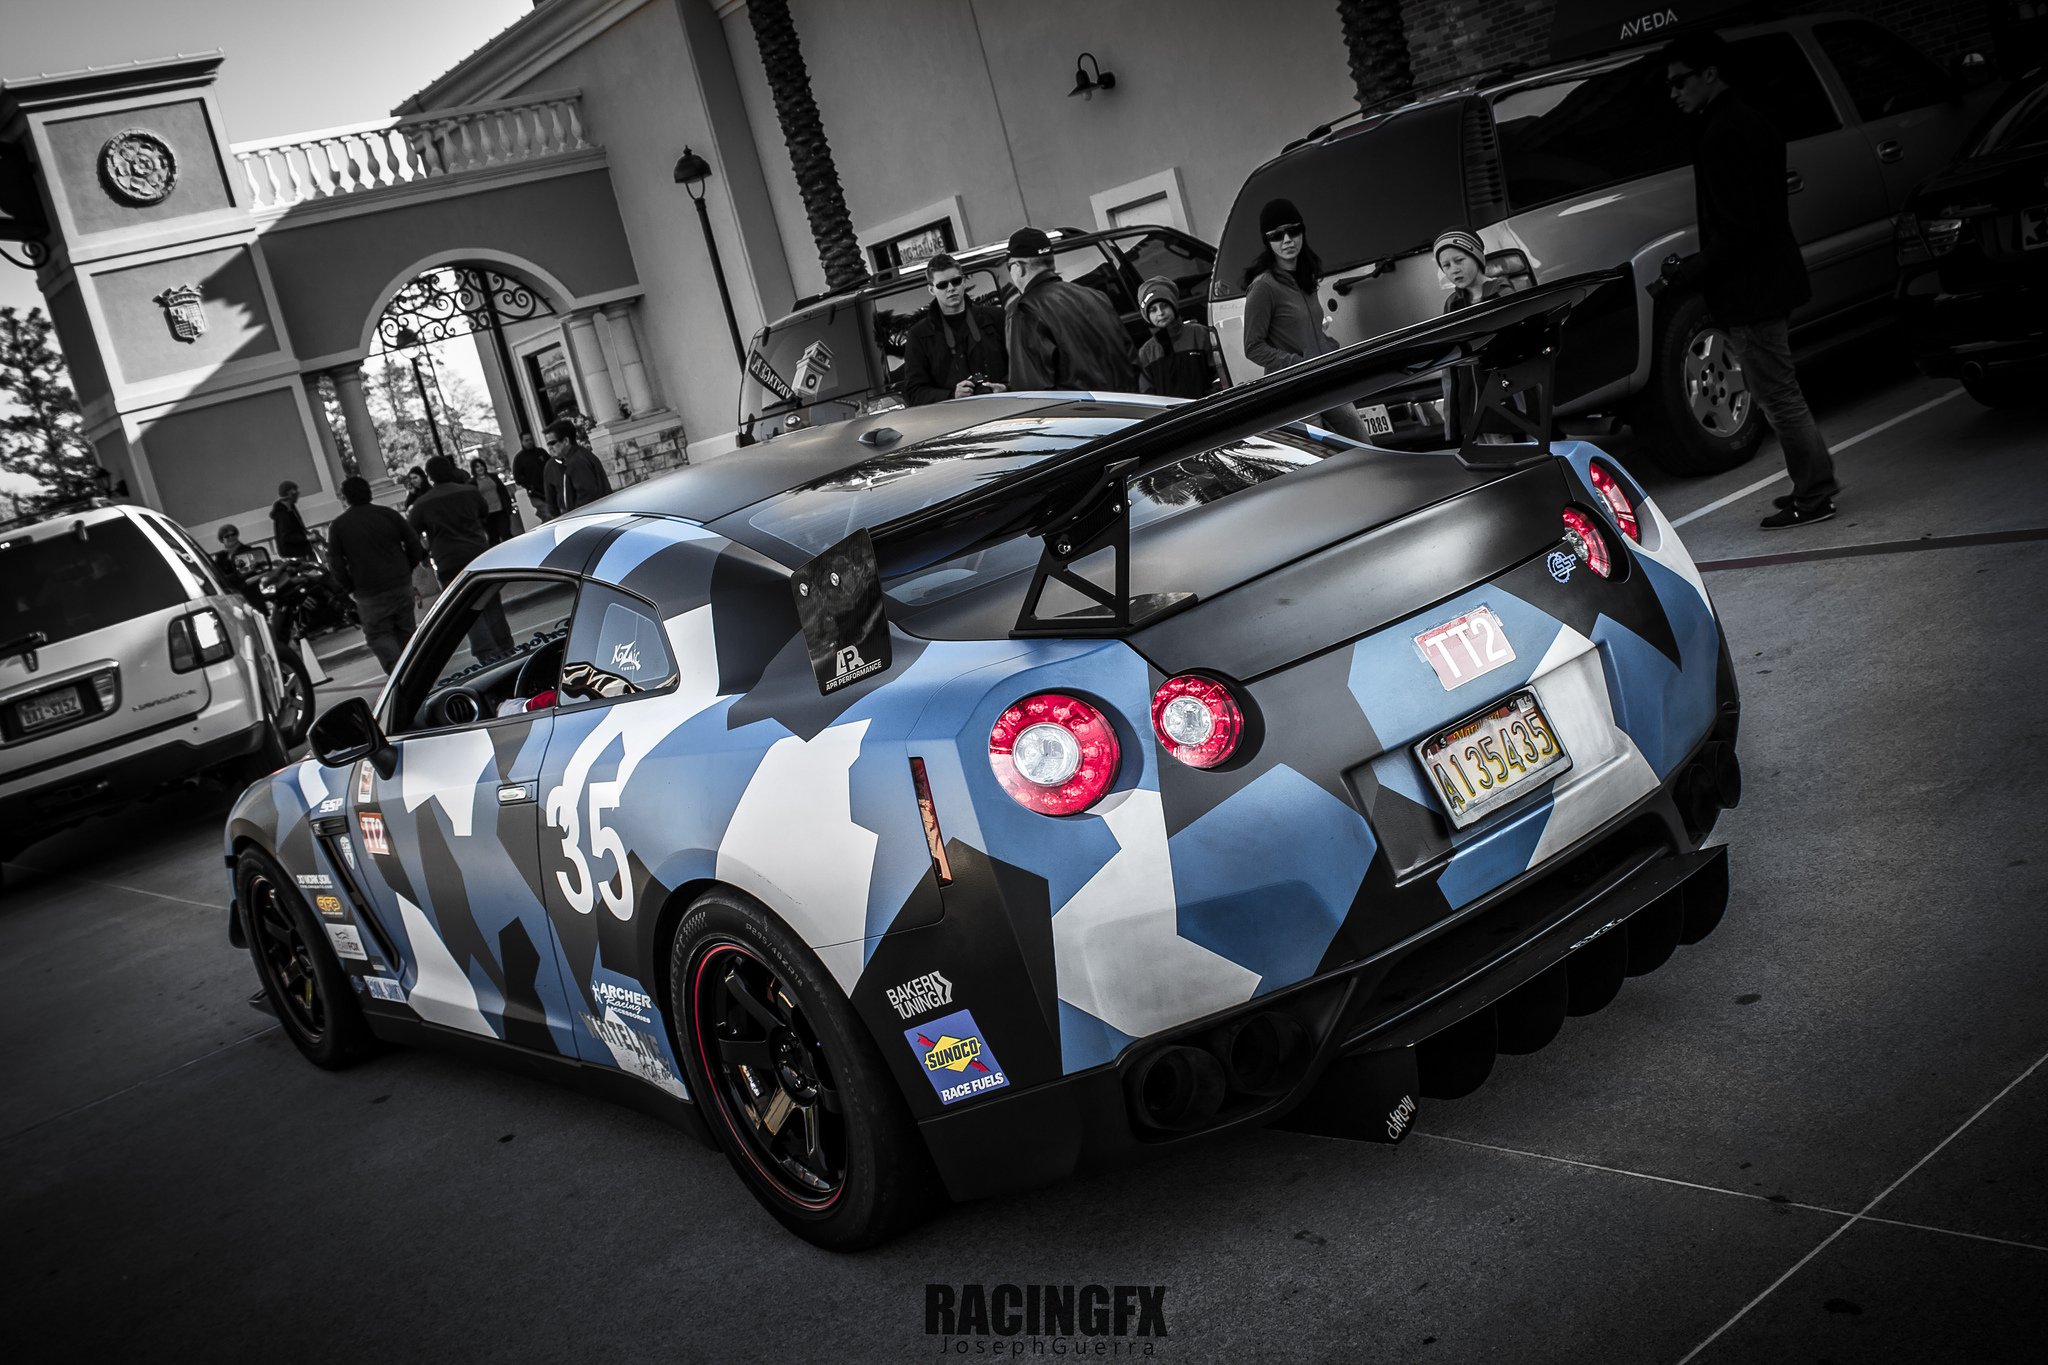 gt r, Nismo, Nissan, R35, Tuning, Supercar, Coupe, Japan, Cars, Blue